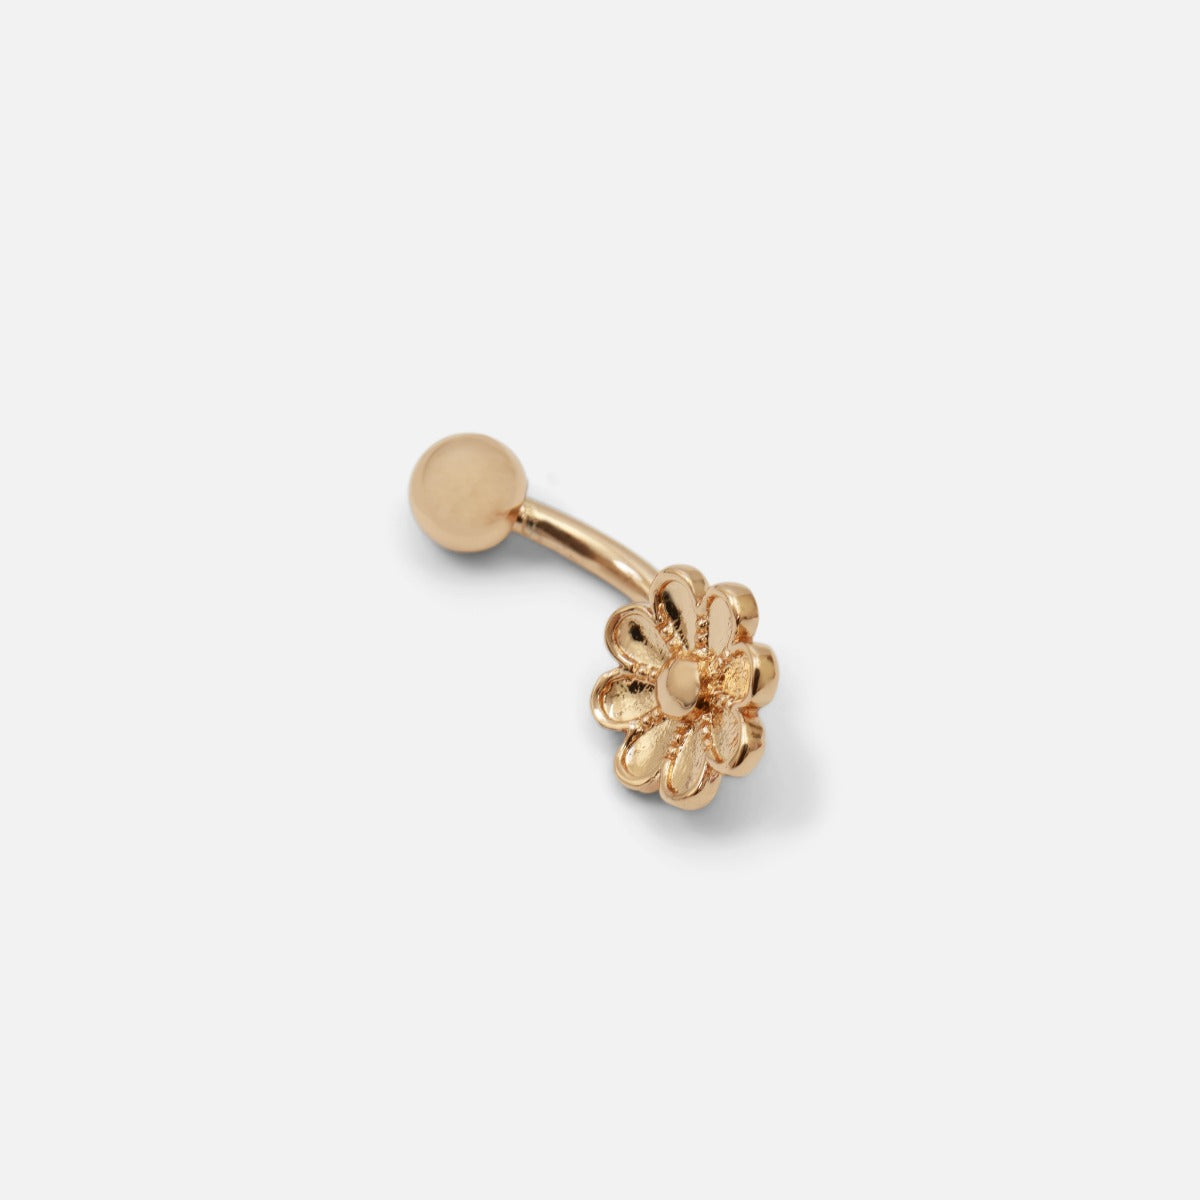 Golden belly button ring with daisy